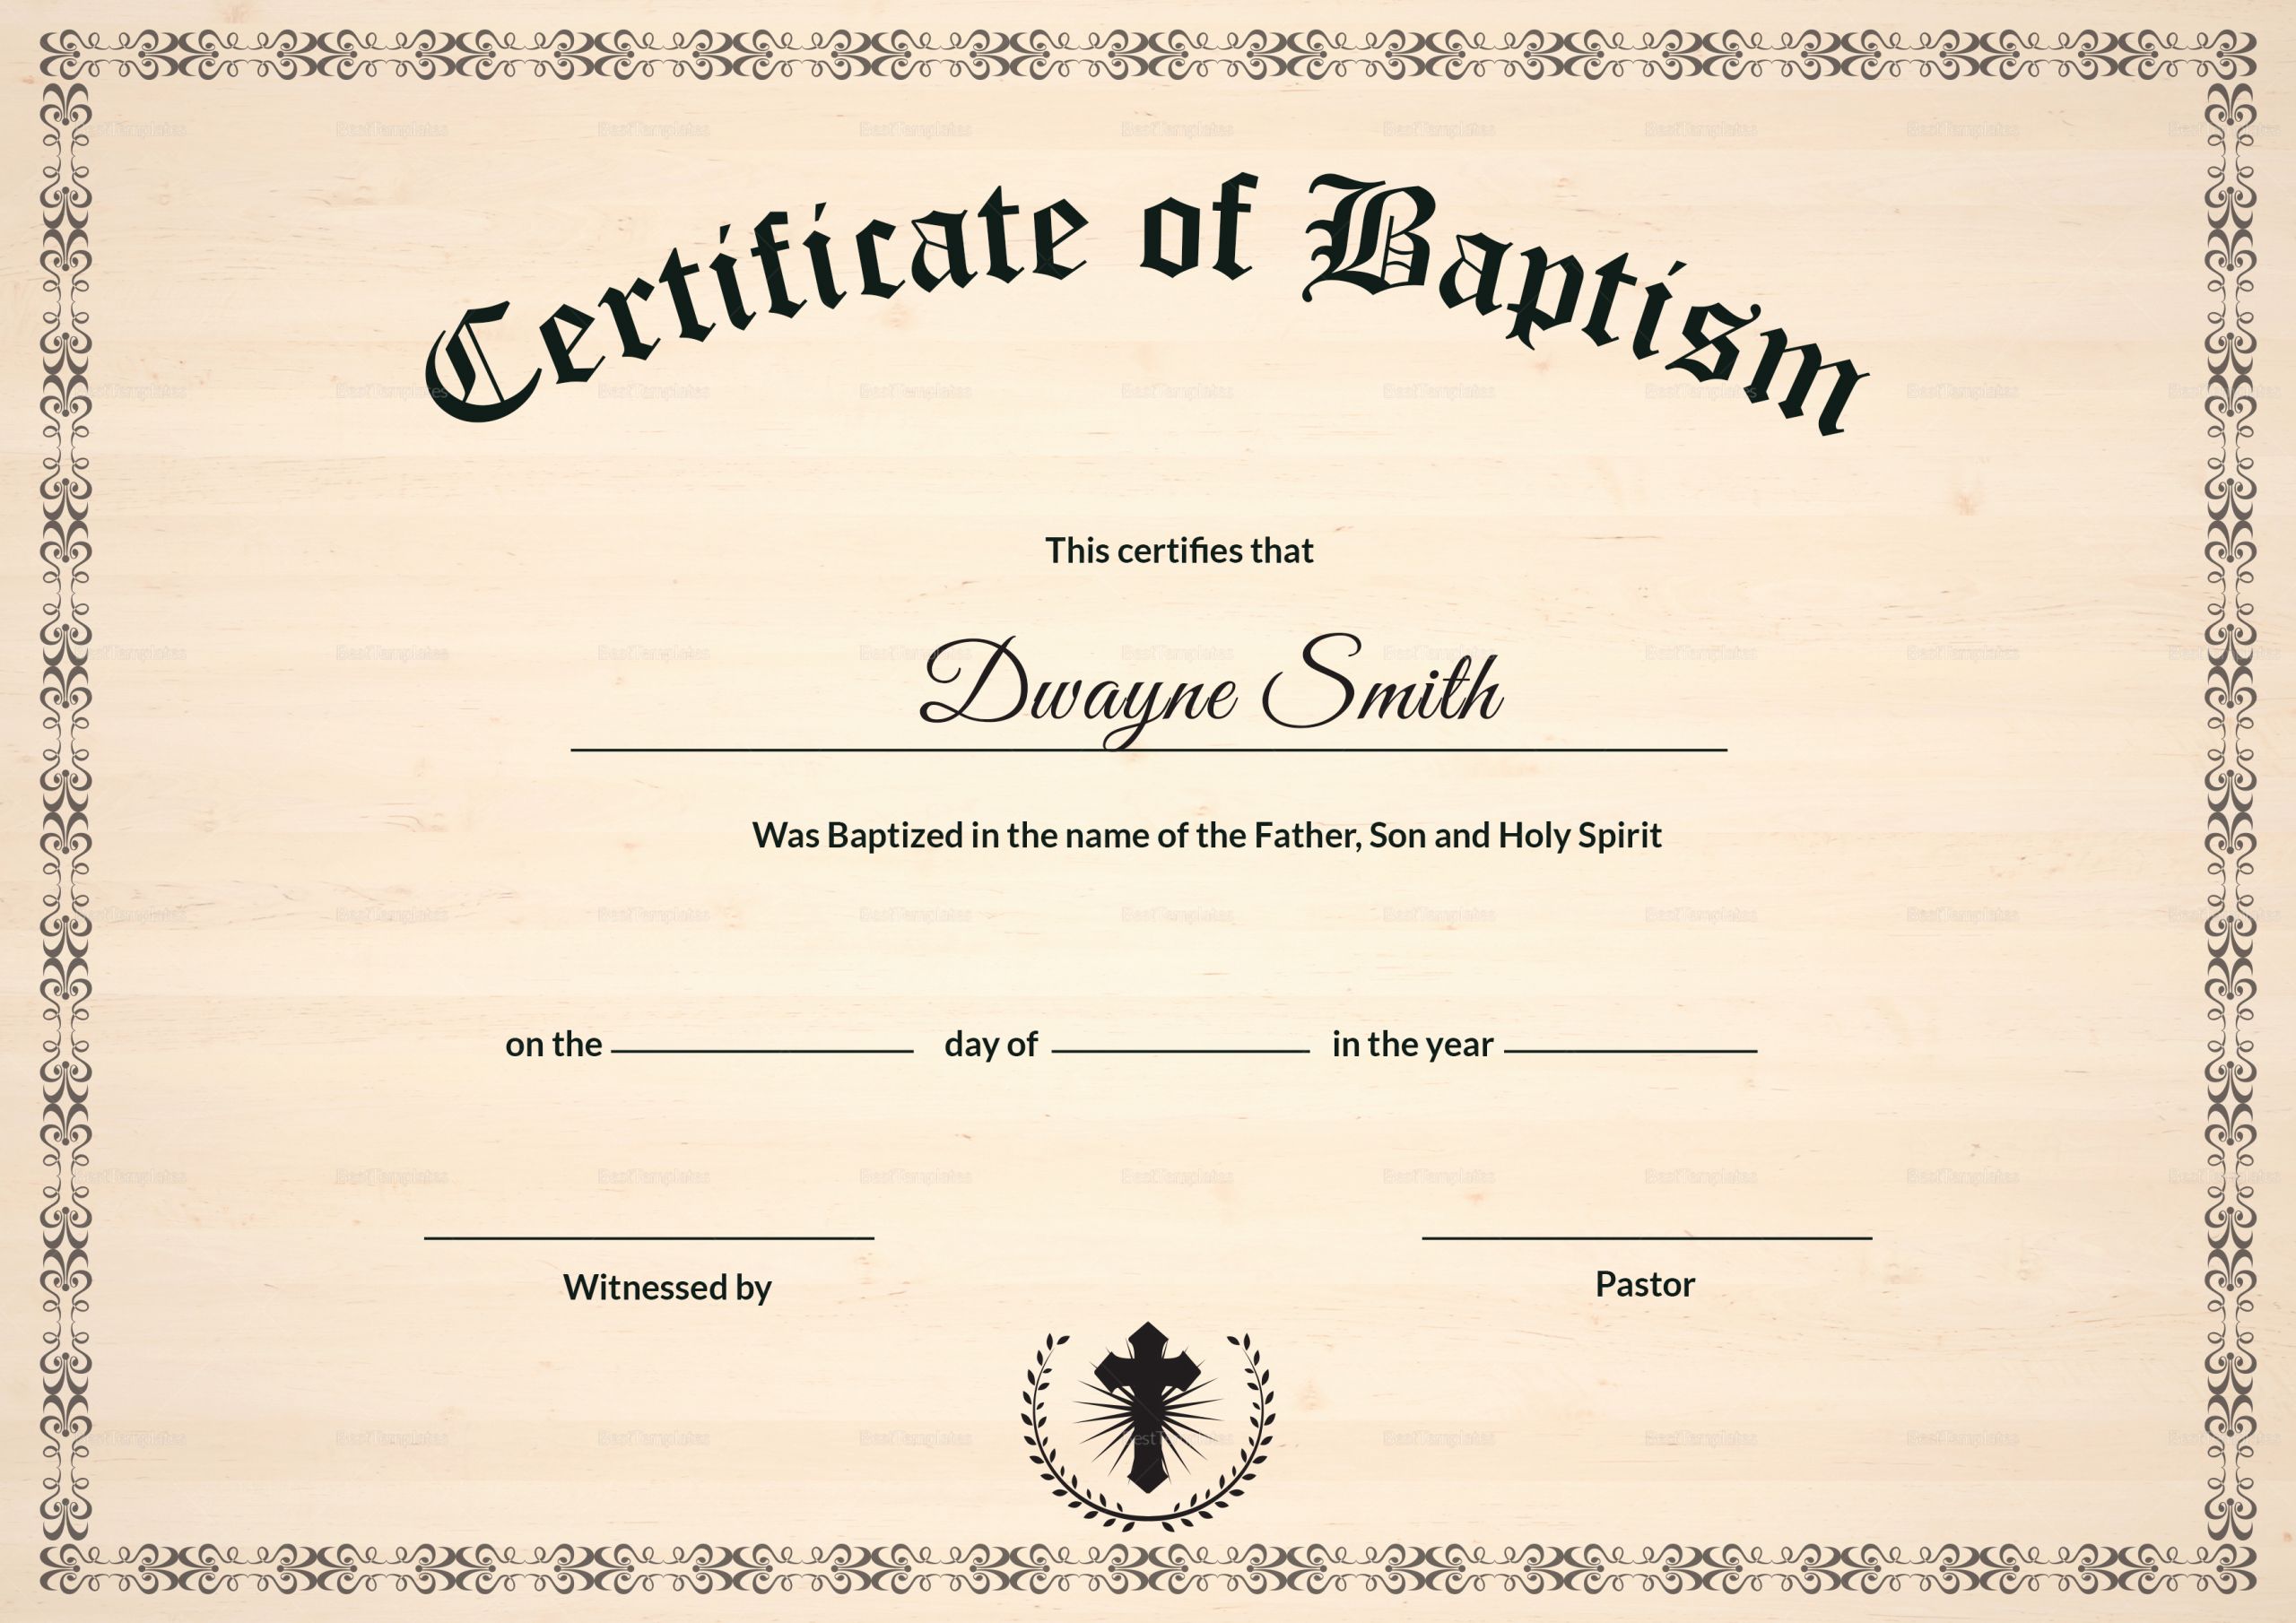 Baptism Certificate Templates Free Download Best Of Baptism Certificate Design Template In Psd Word